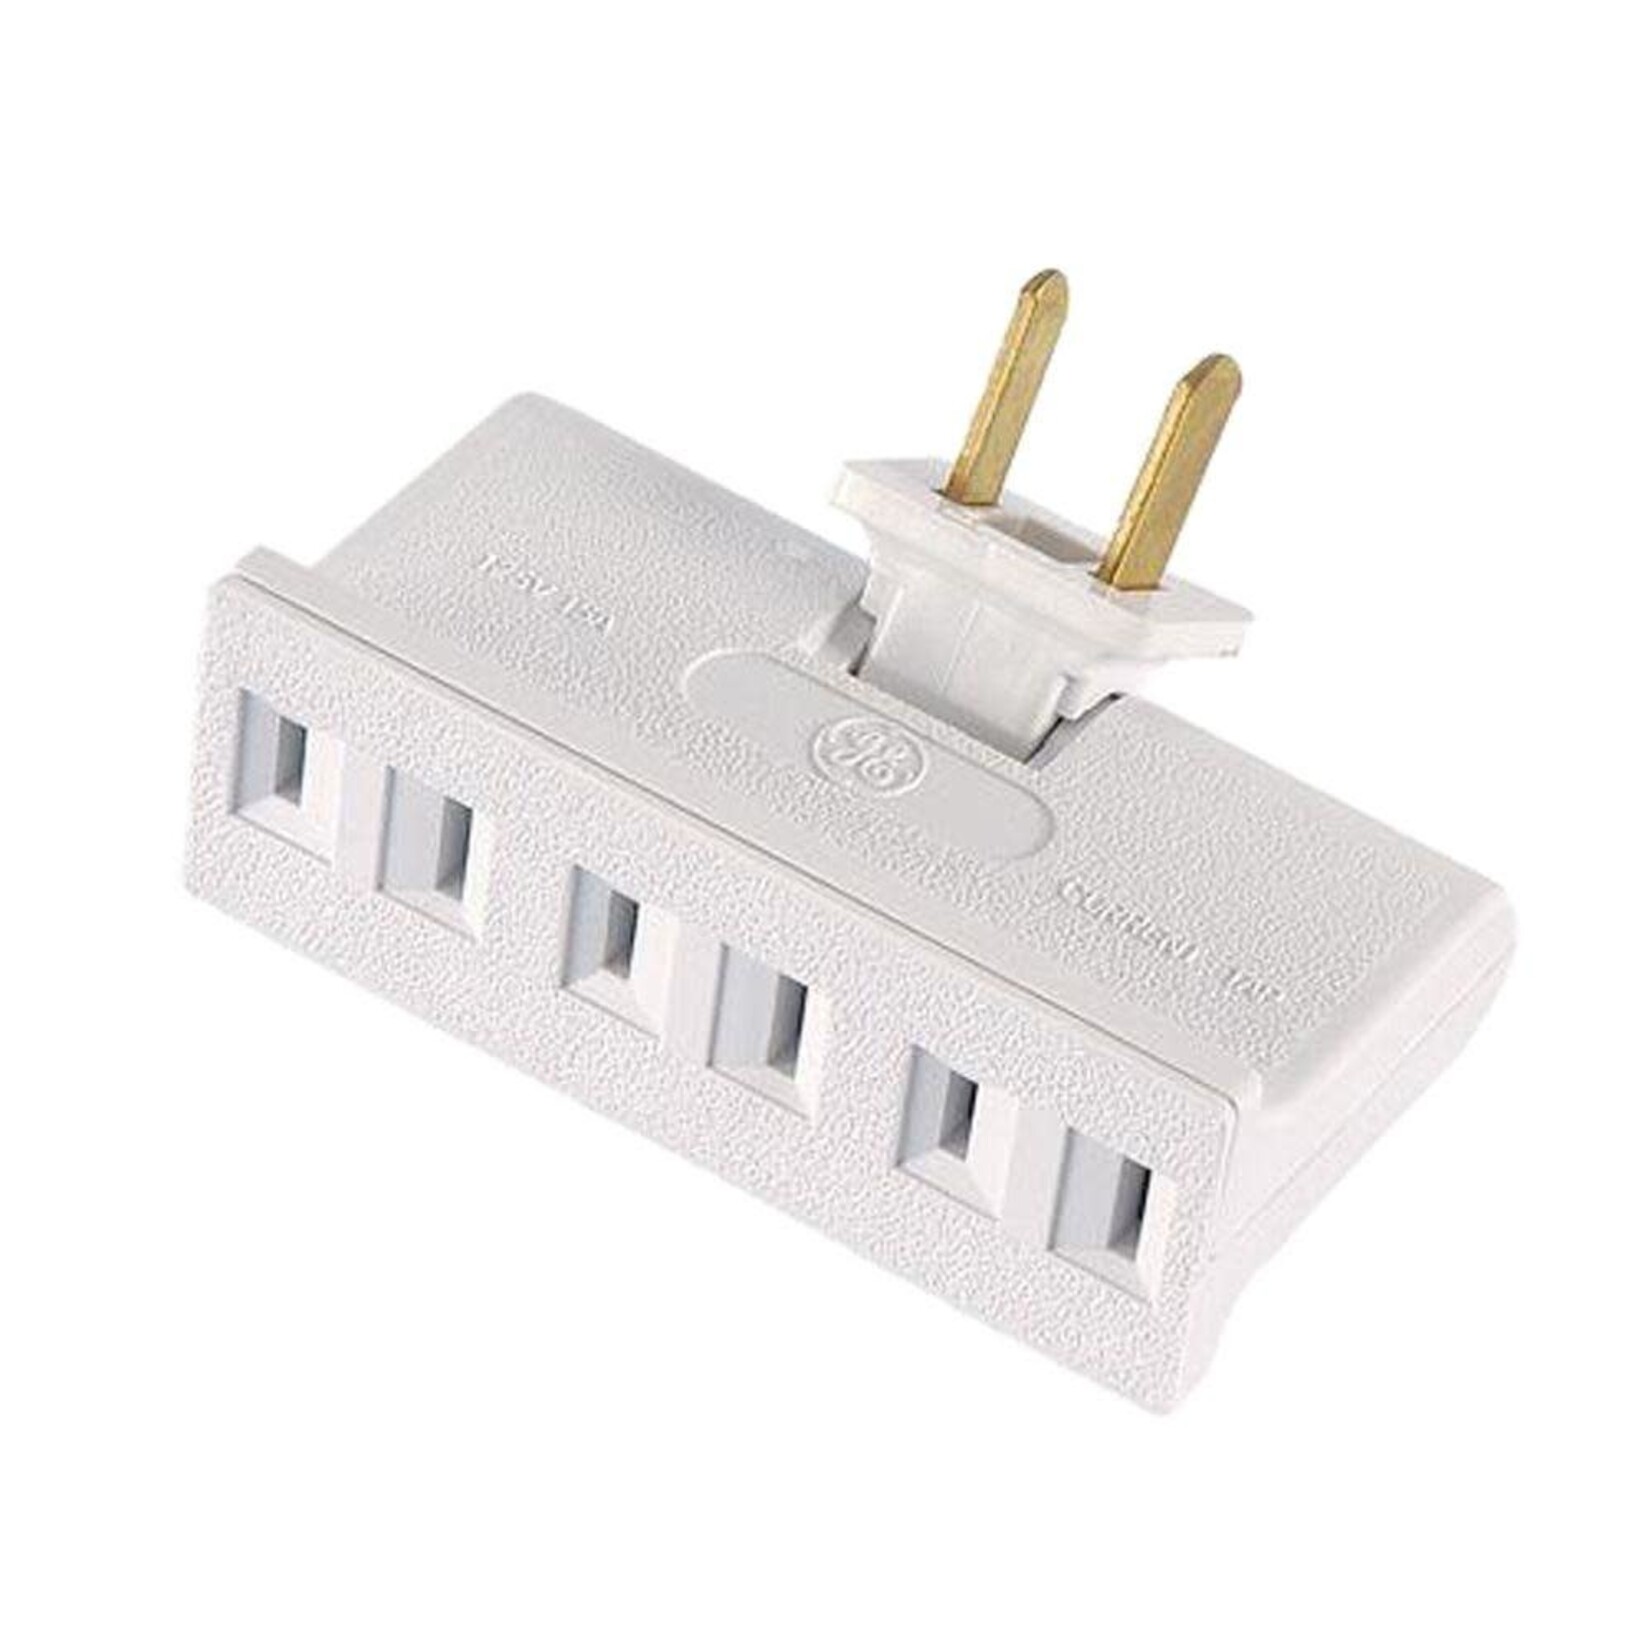 CLT GE 54185 3 Outlet Wall